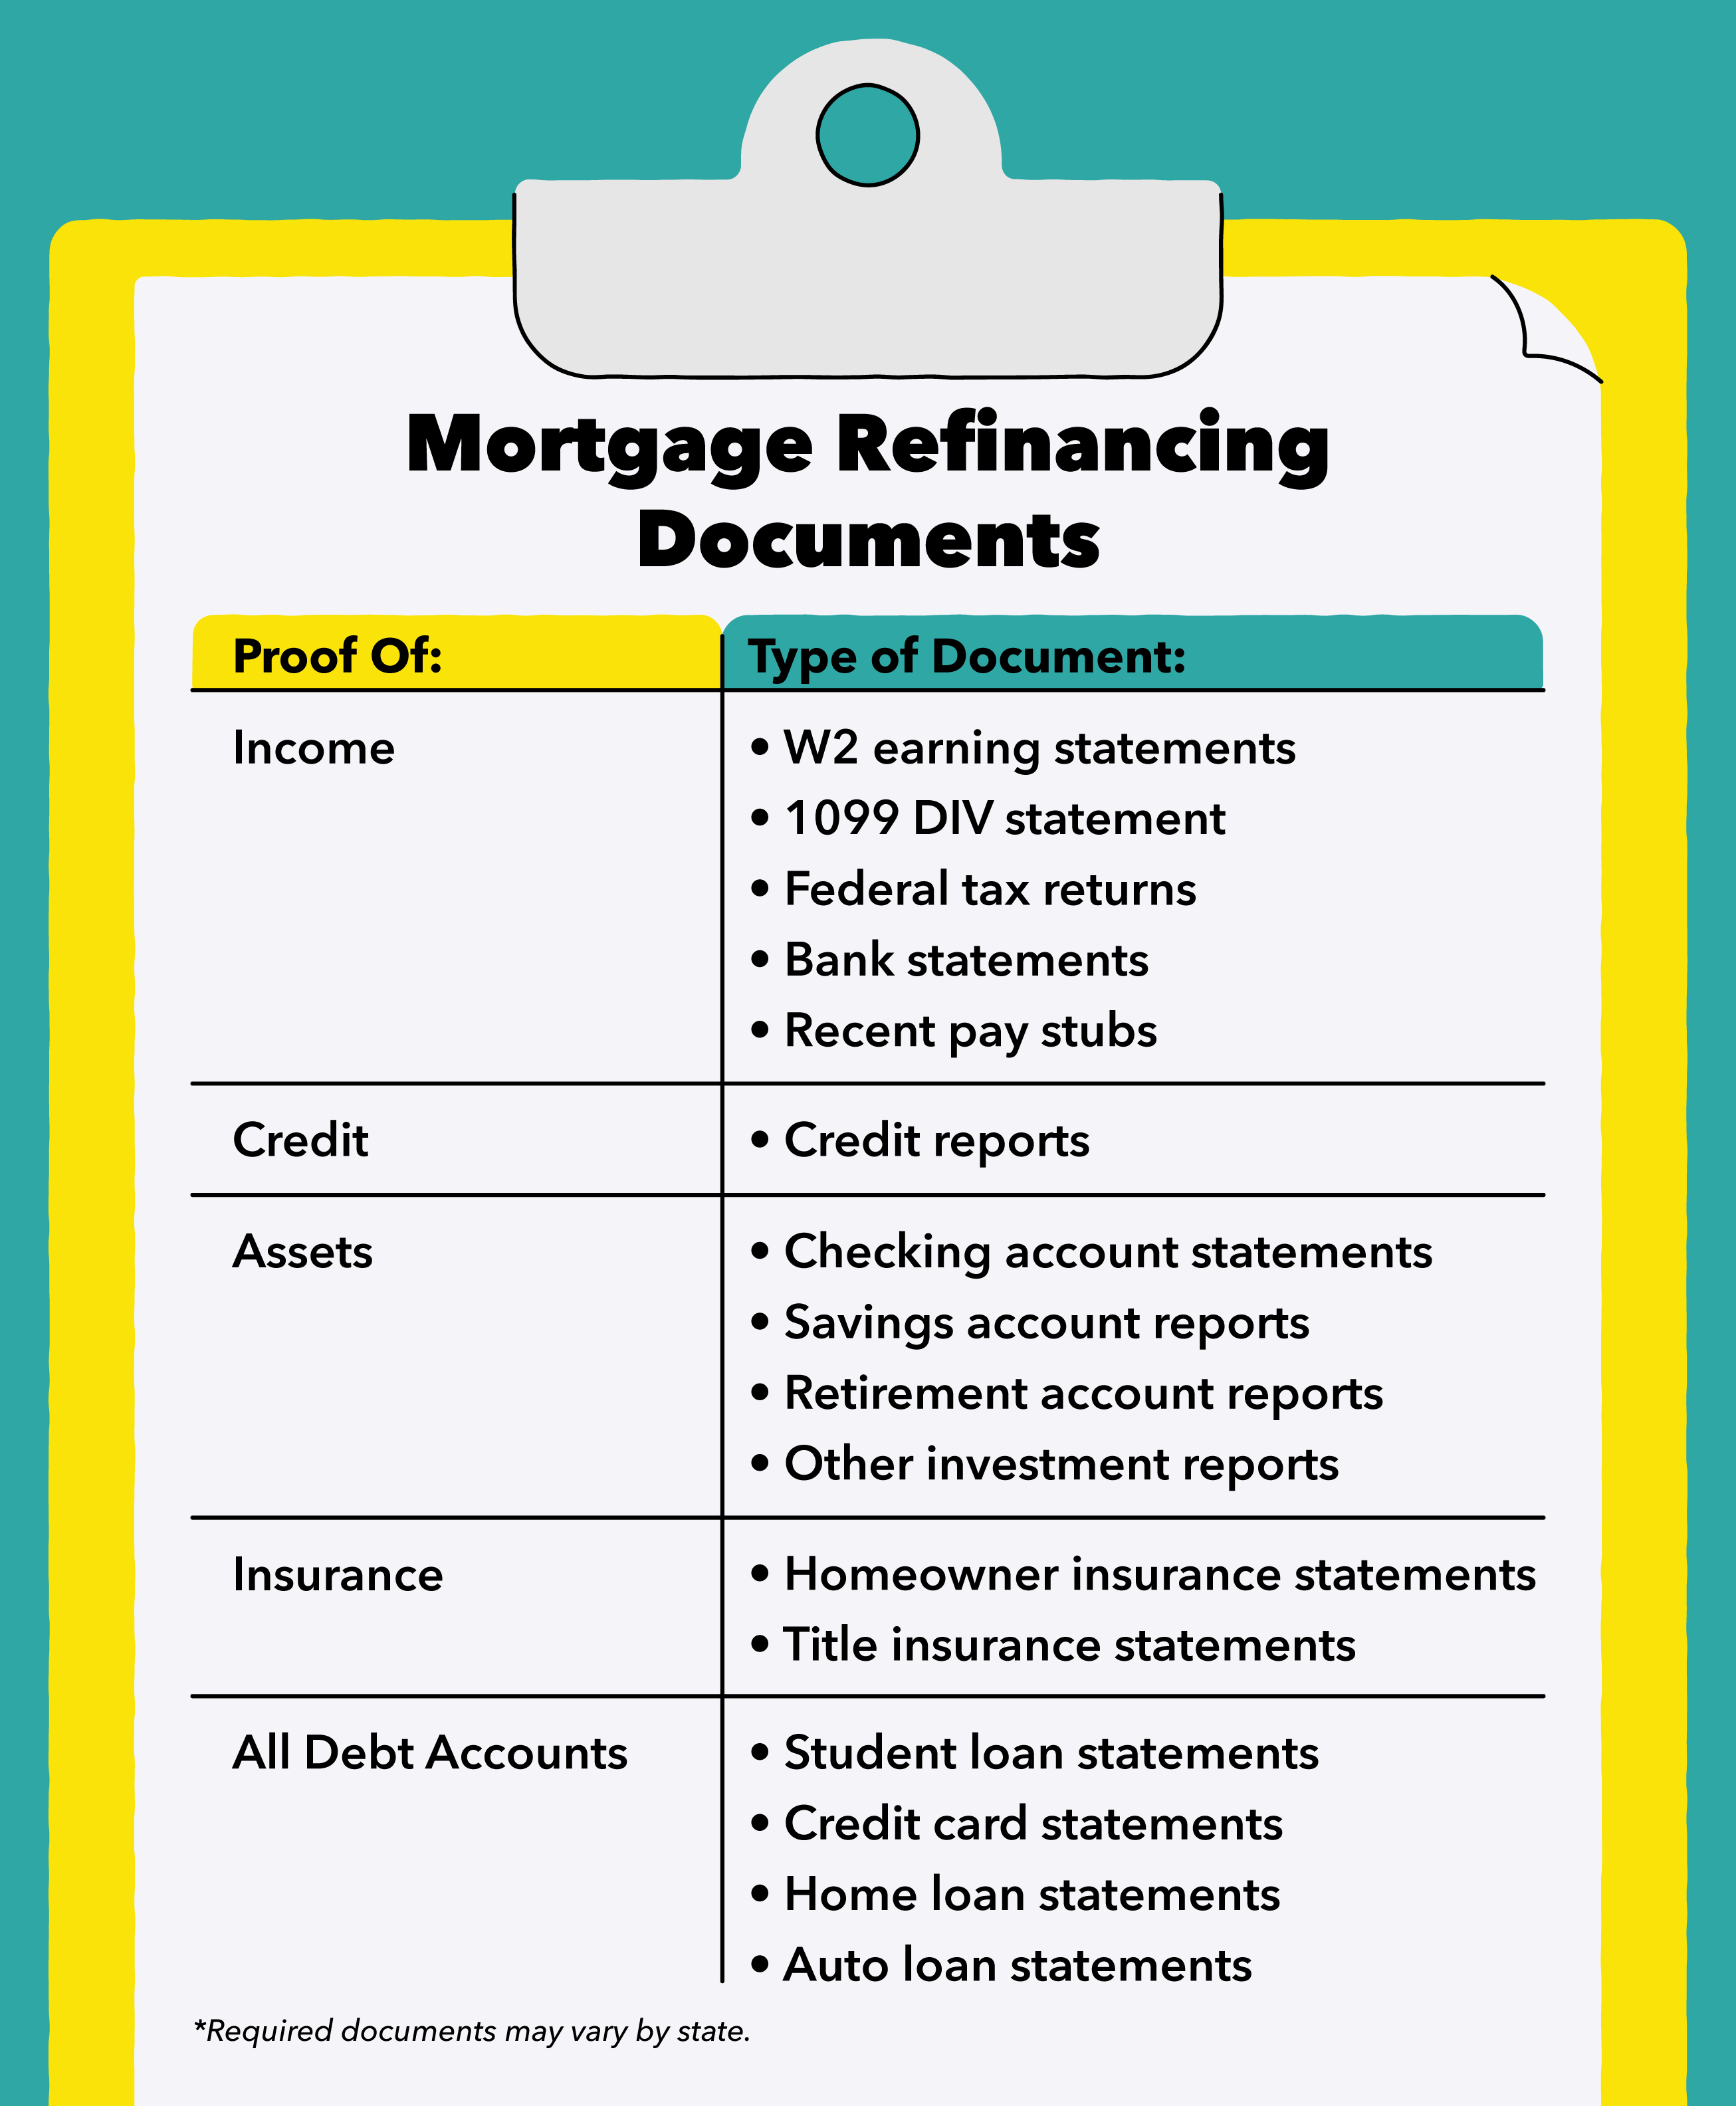 Mortgage Refinancing Documents